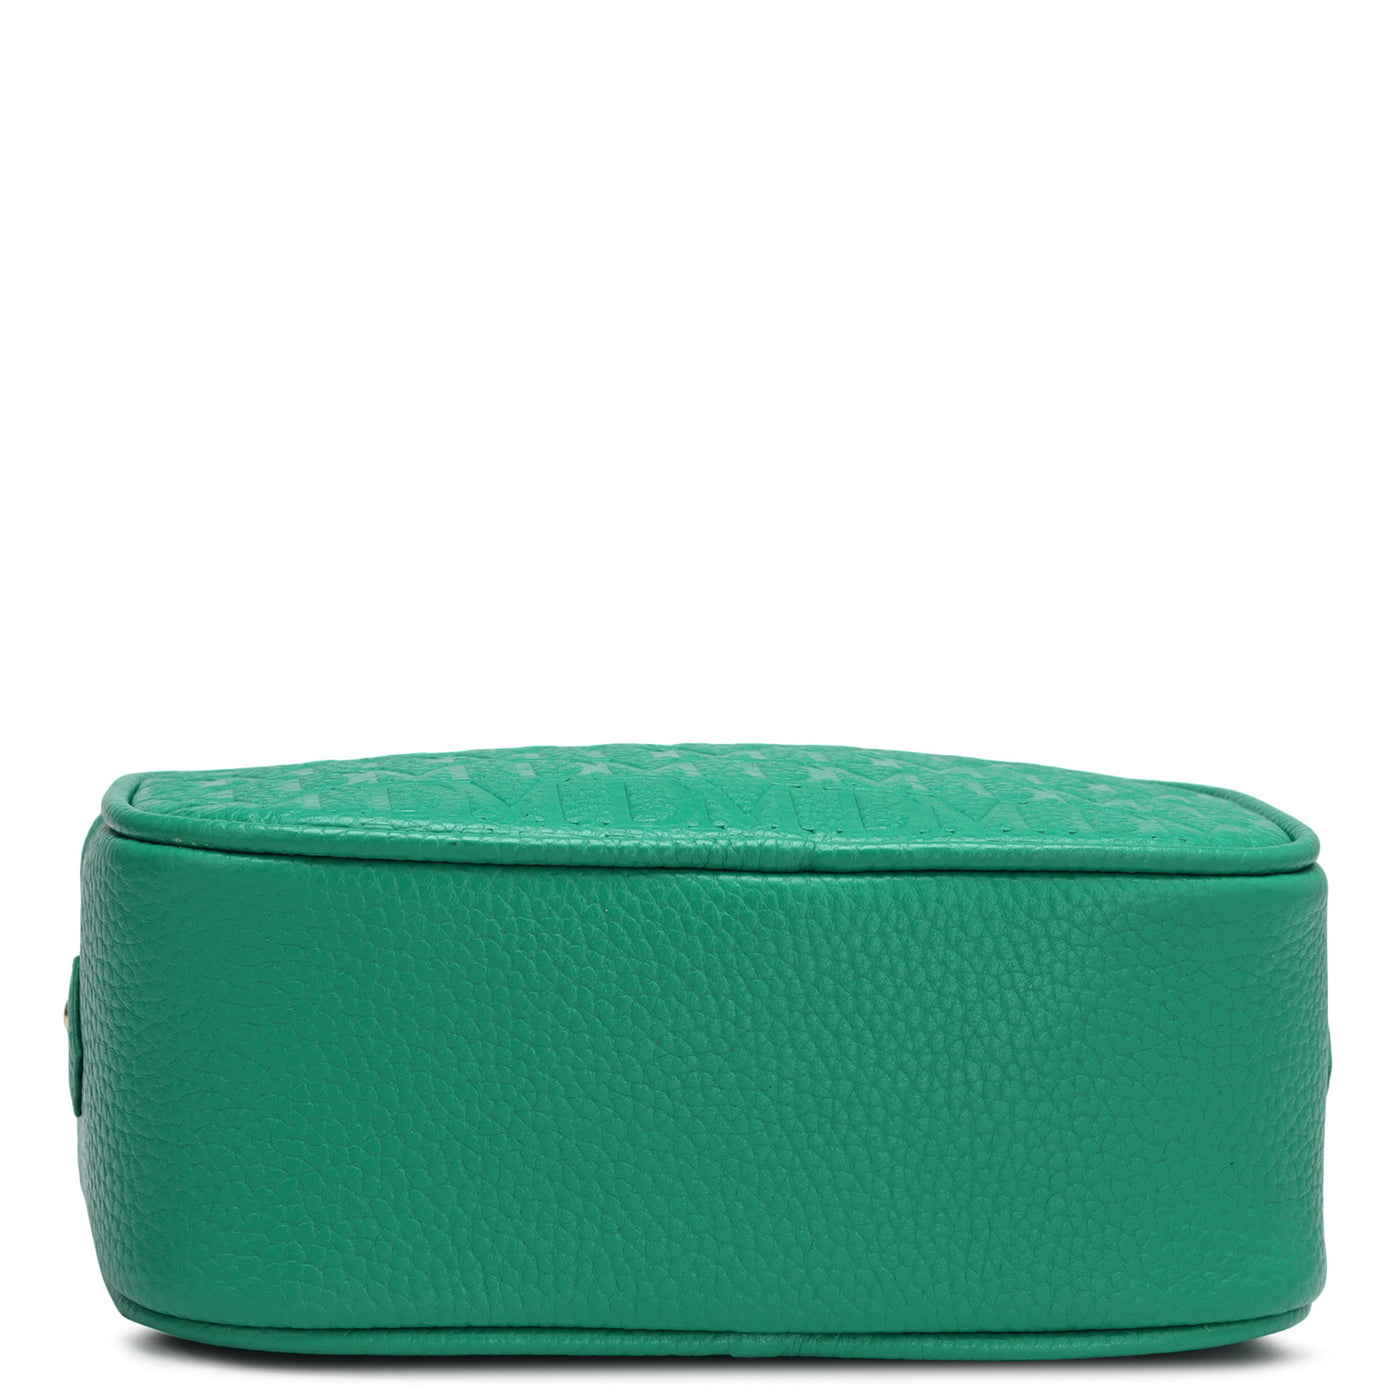 Small Monogram Leather Sling - Green